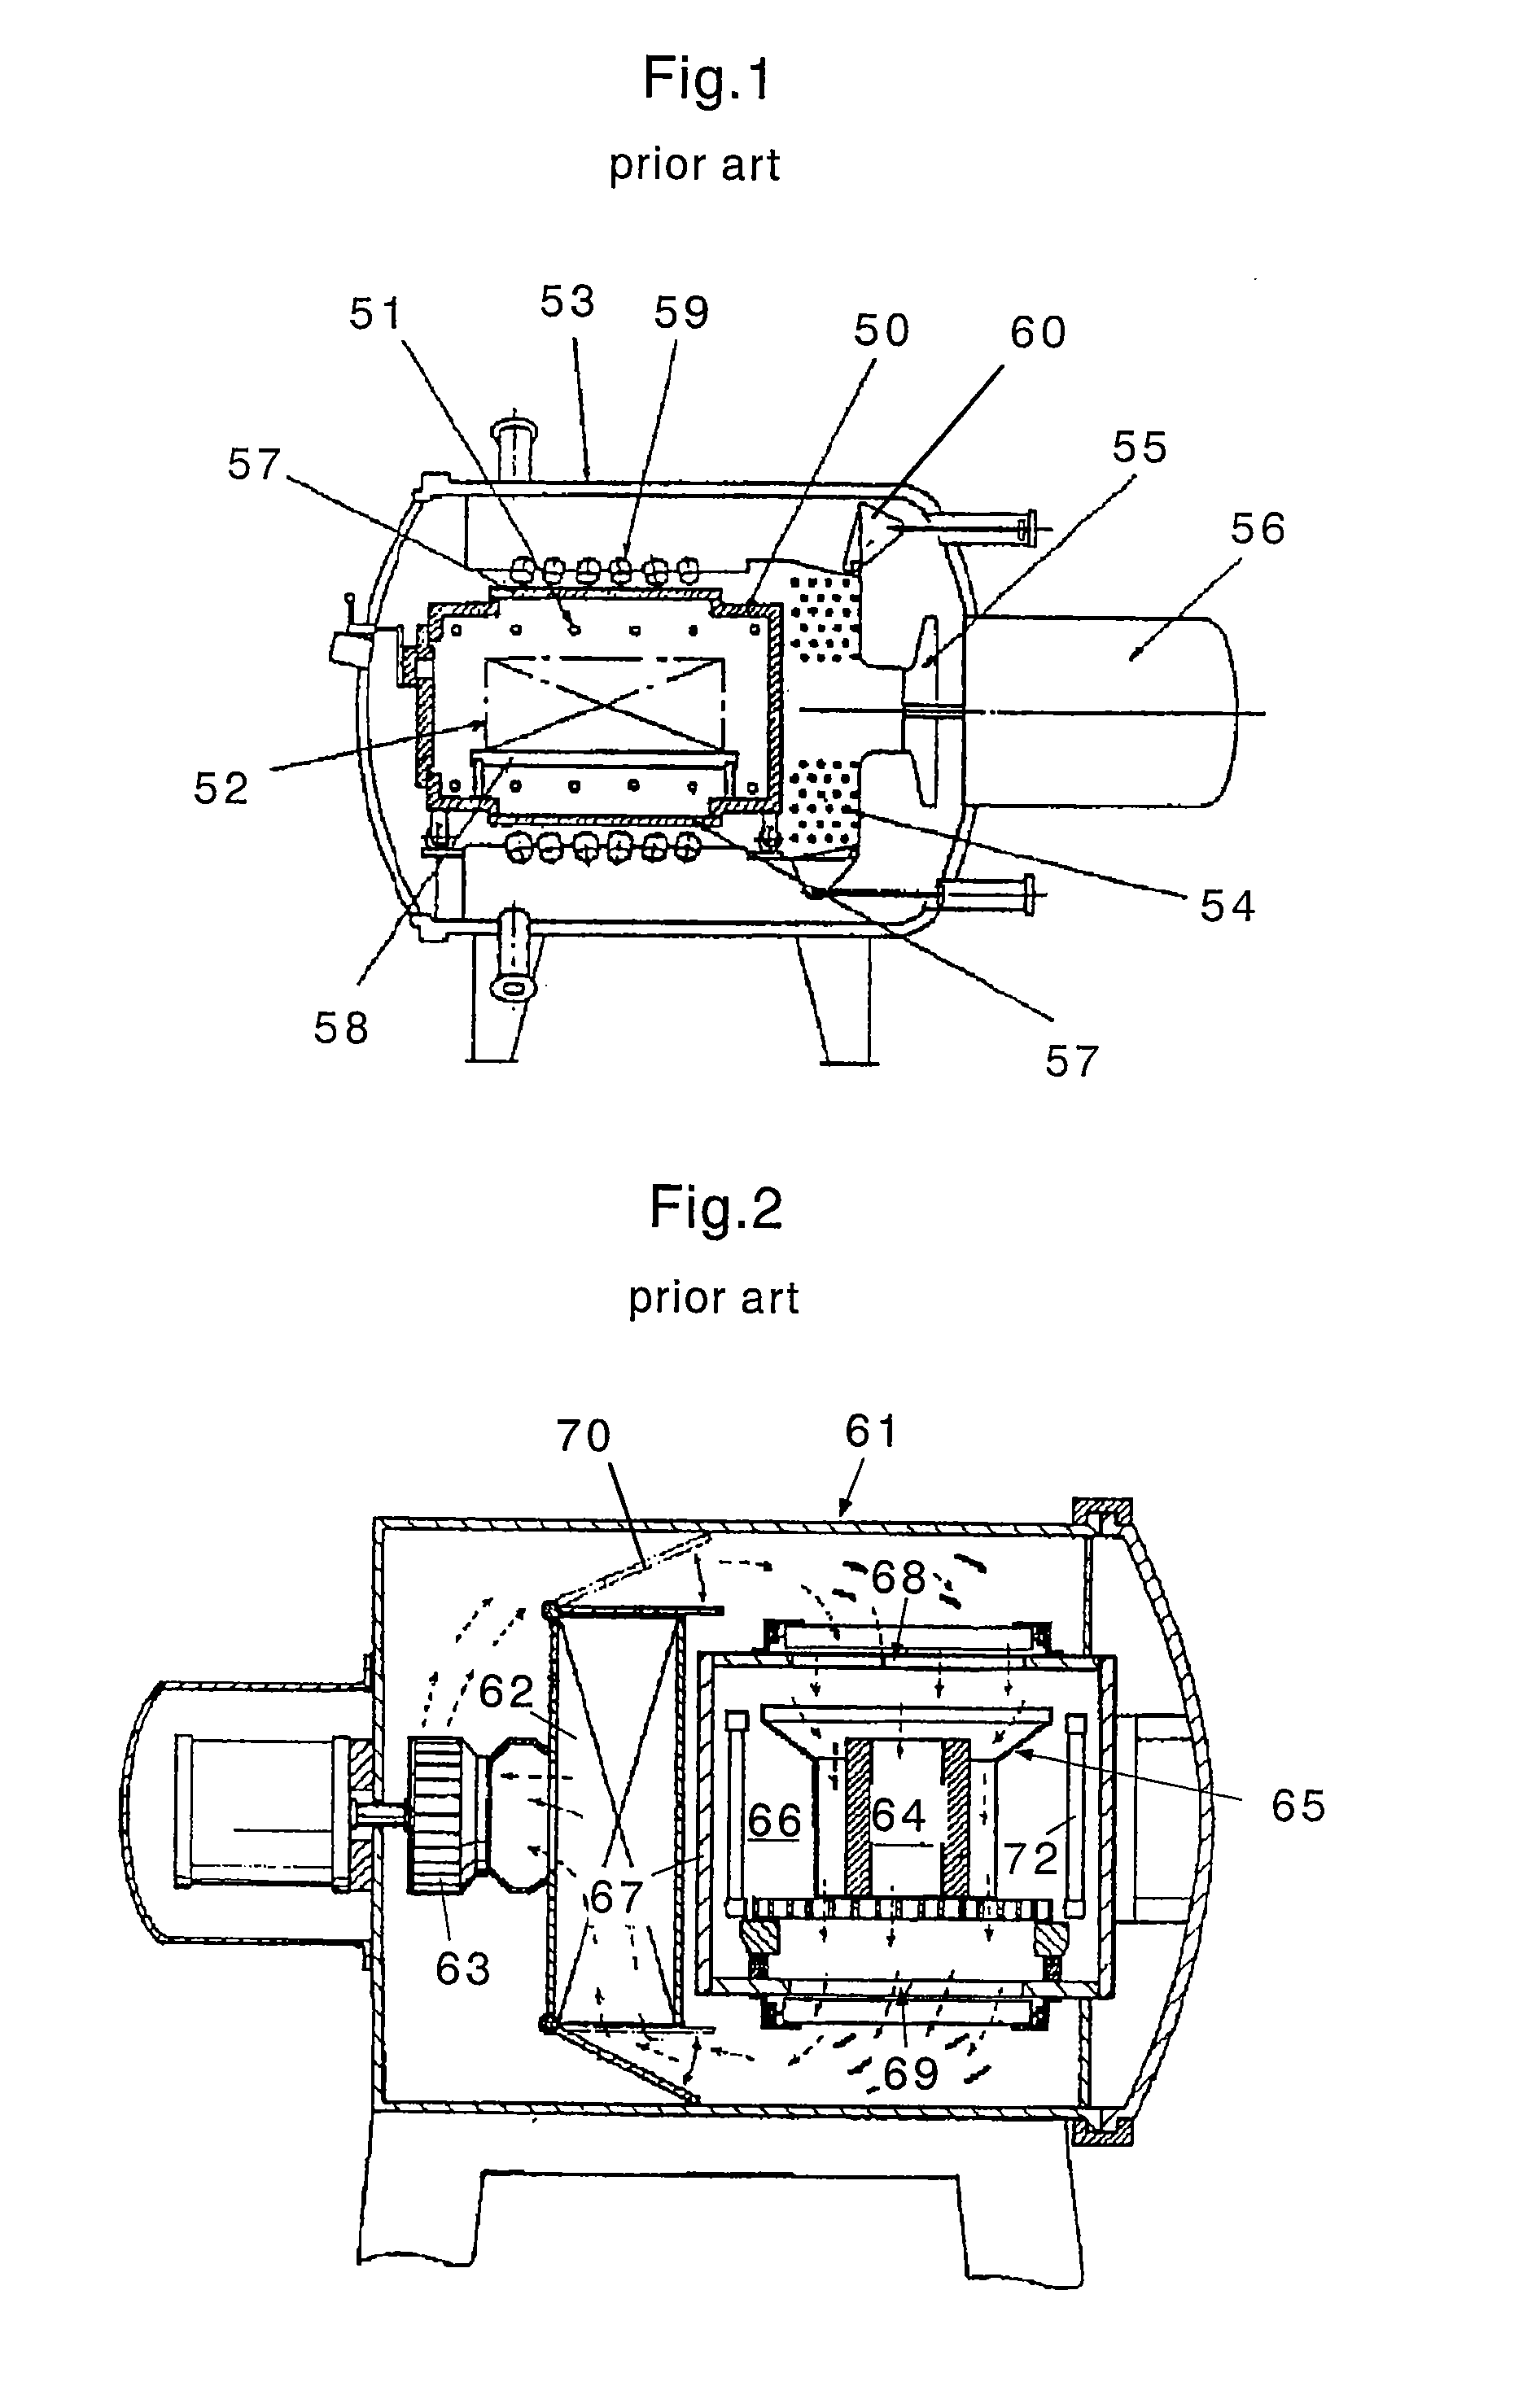 Change-over apparatus for cooling gas passages in vacuum heat treating furnace